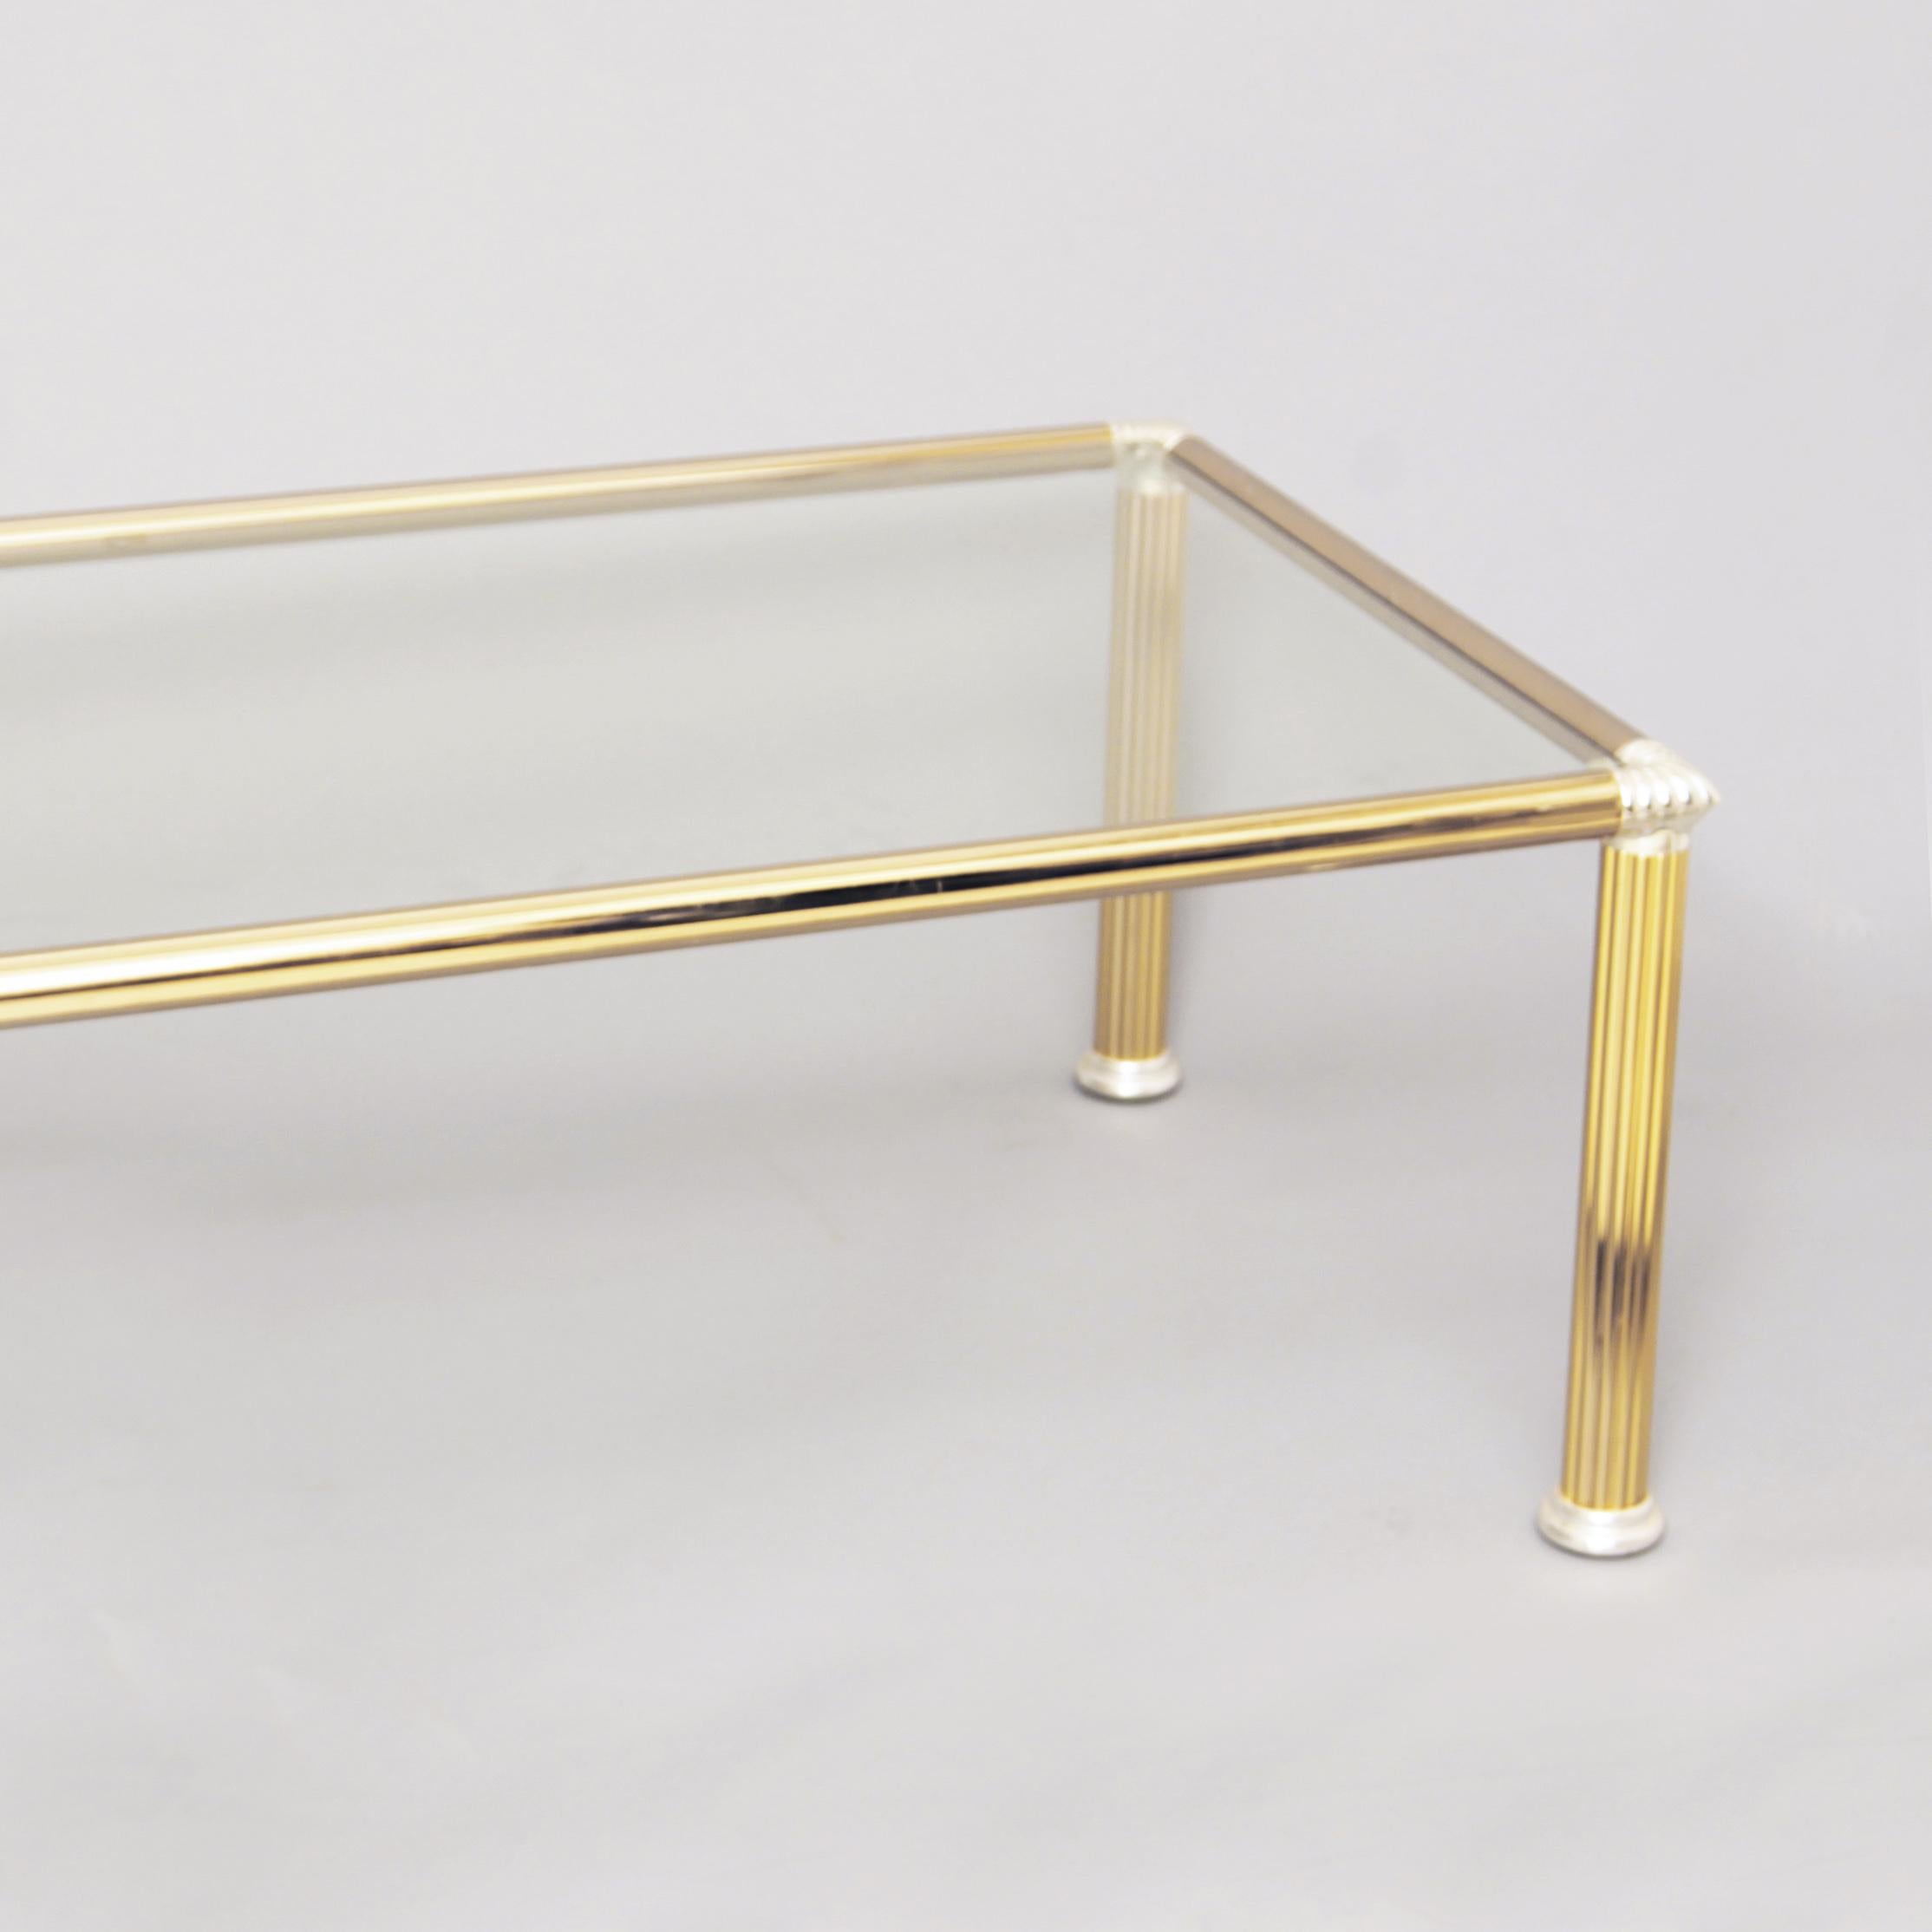 Late 20th Century Chrome Brass Glass Coffee Table Hollywood Regency Midcentury Vintage 1970s For Sale